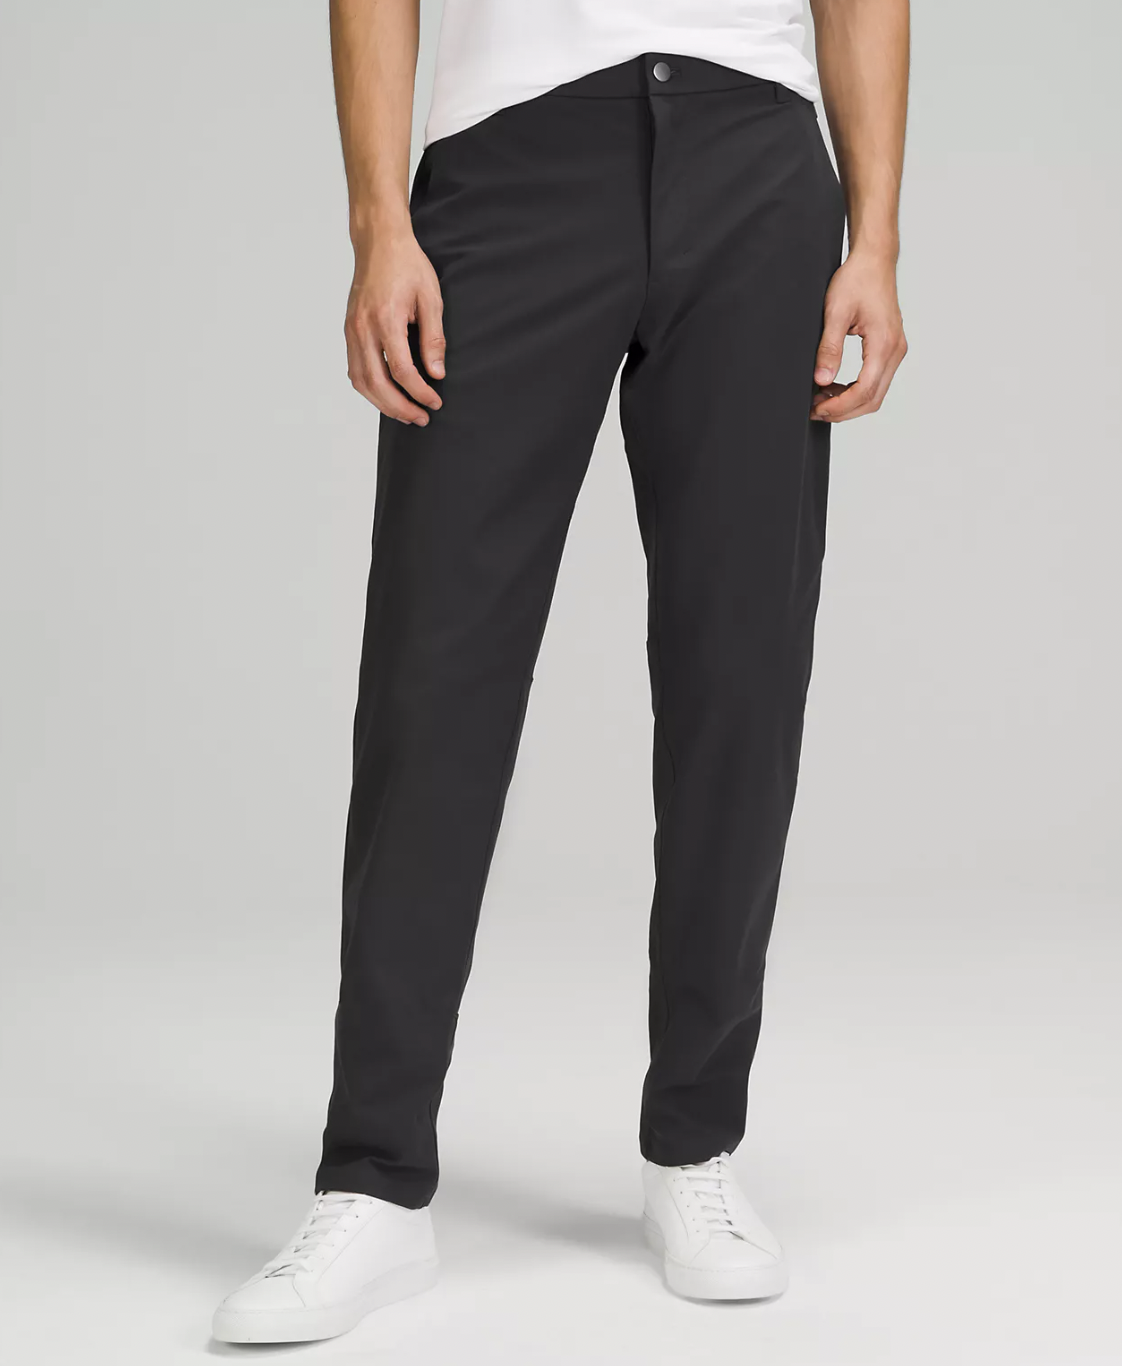 8 Most Comfortable Mens Dress Pants To Wear All Day  HuffPost Life